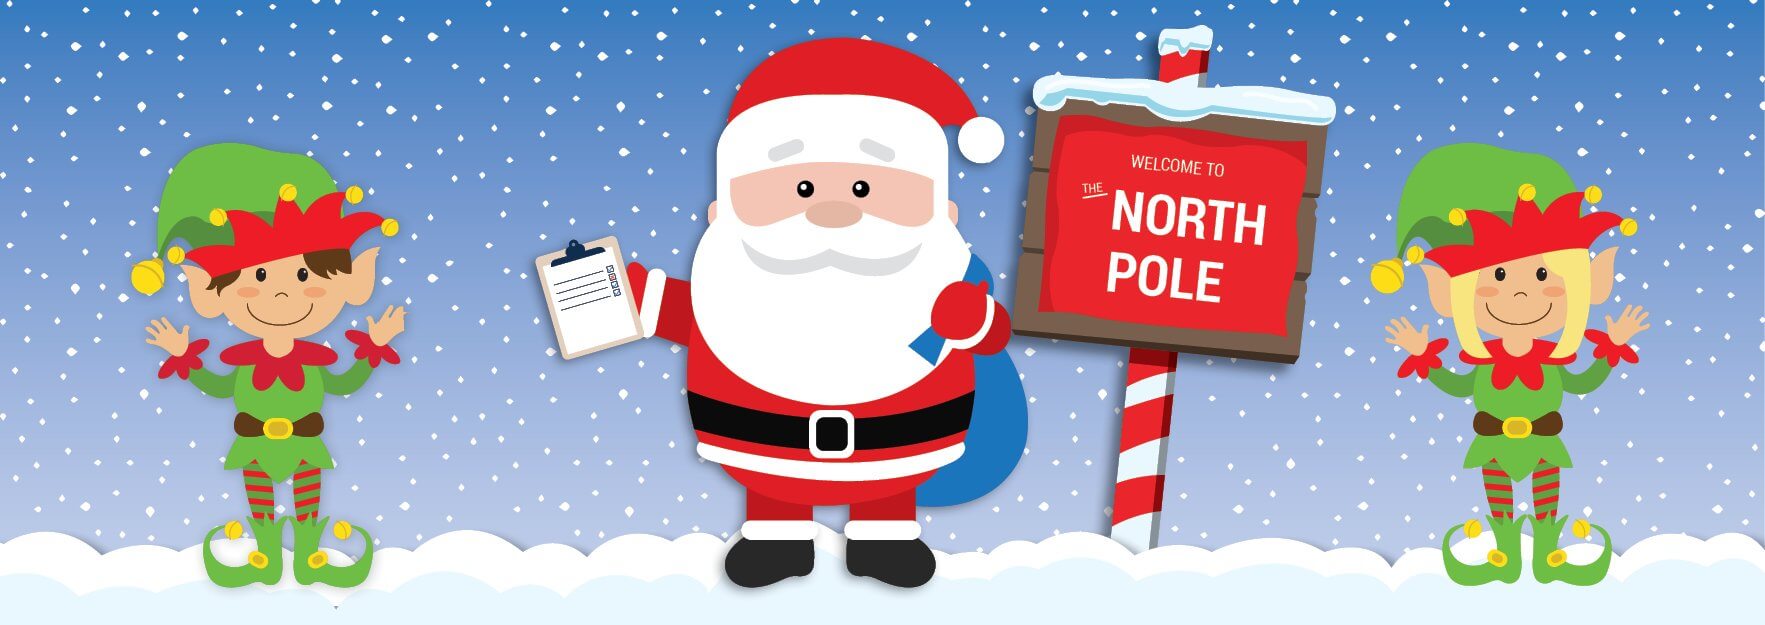 Santa and elves in front of a North Pole sign